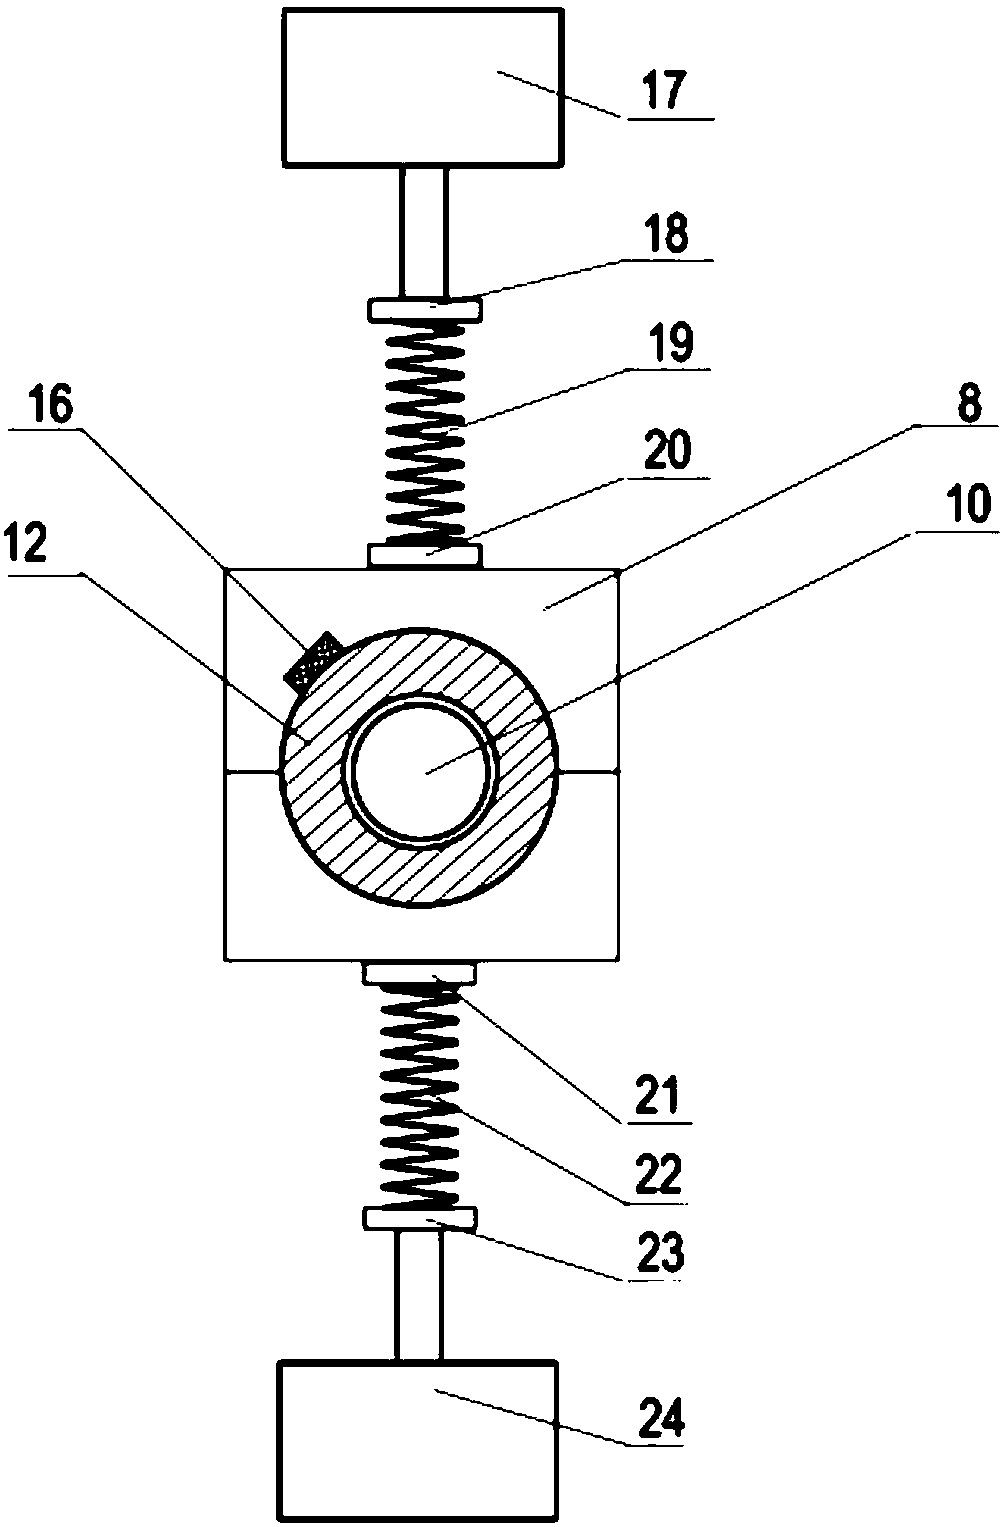 Bearing test device capable of loading alternating load